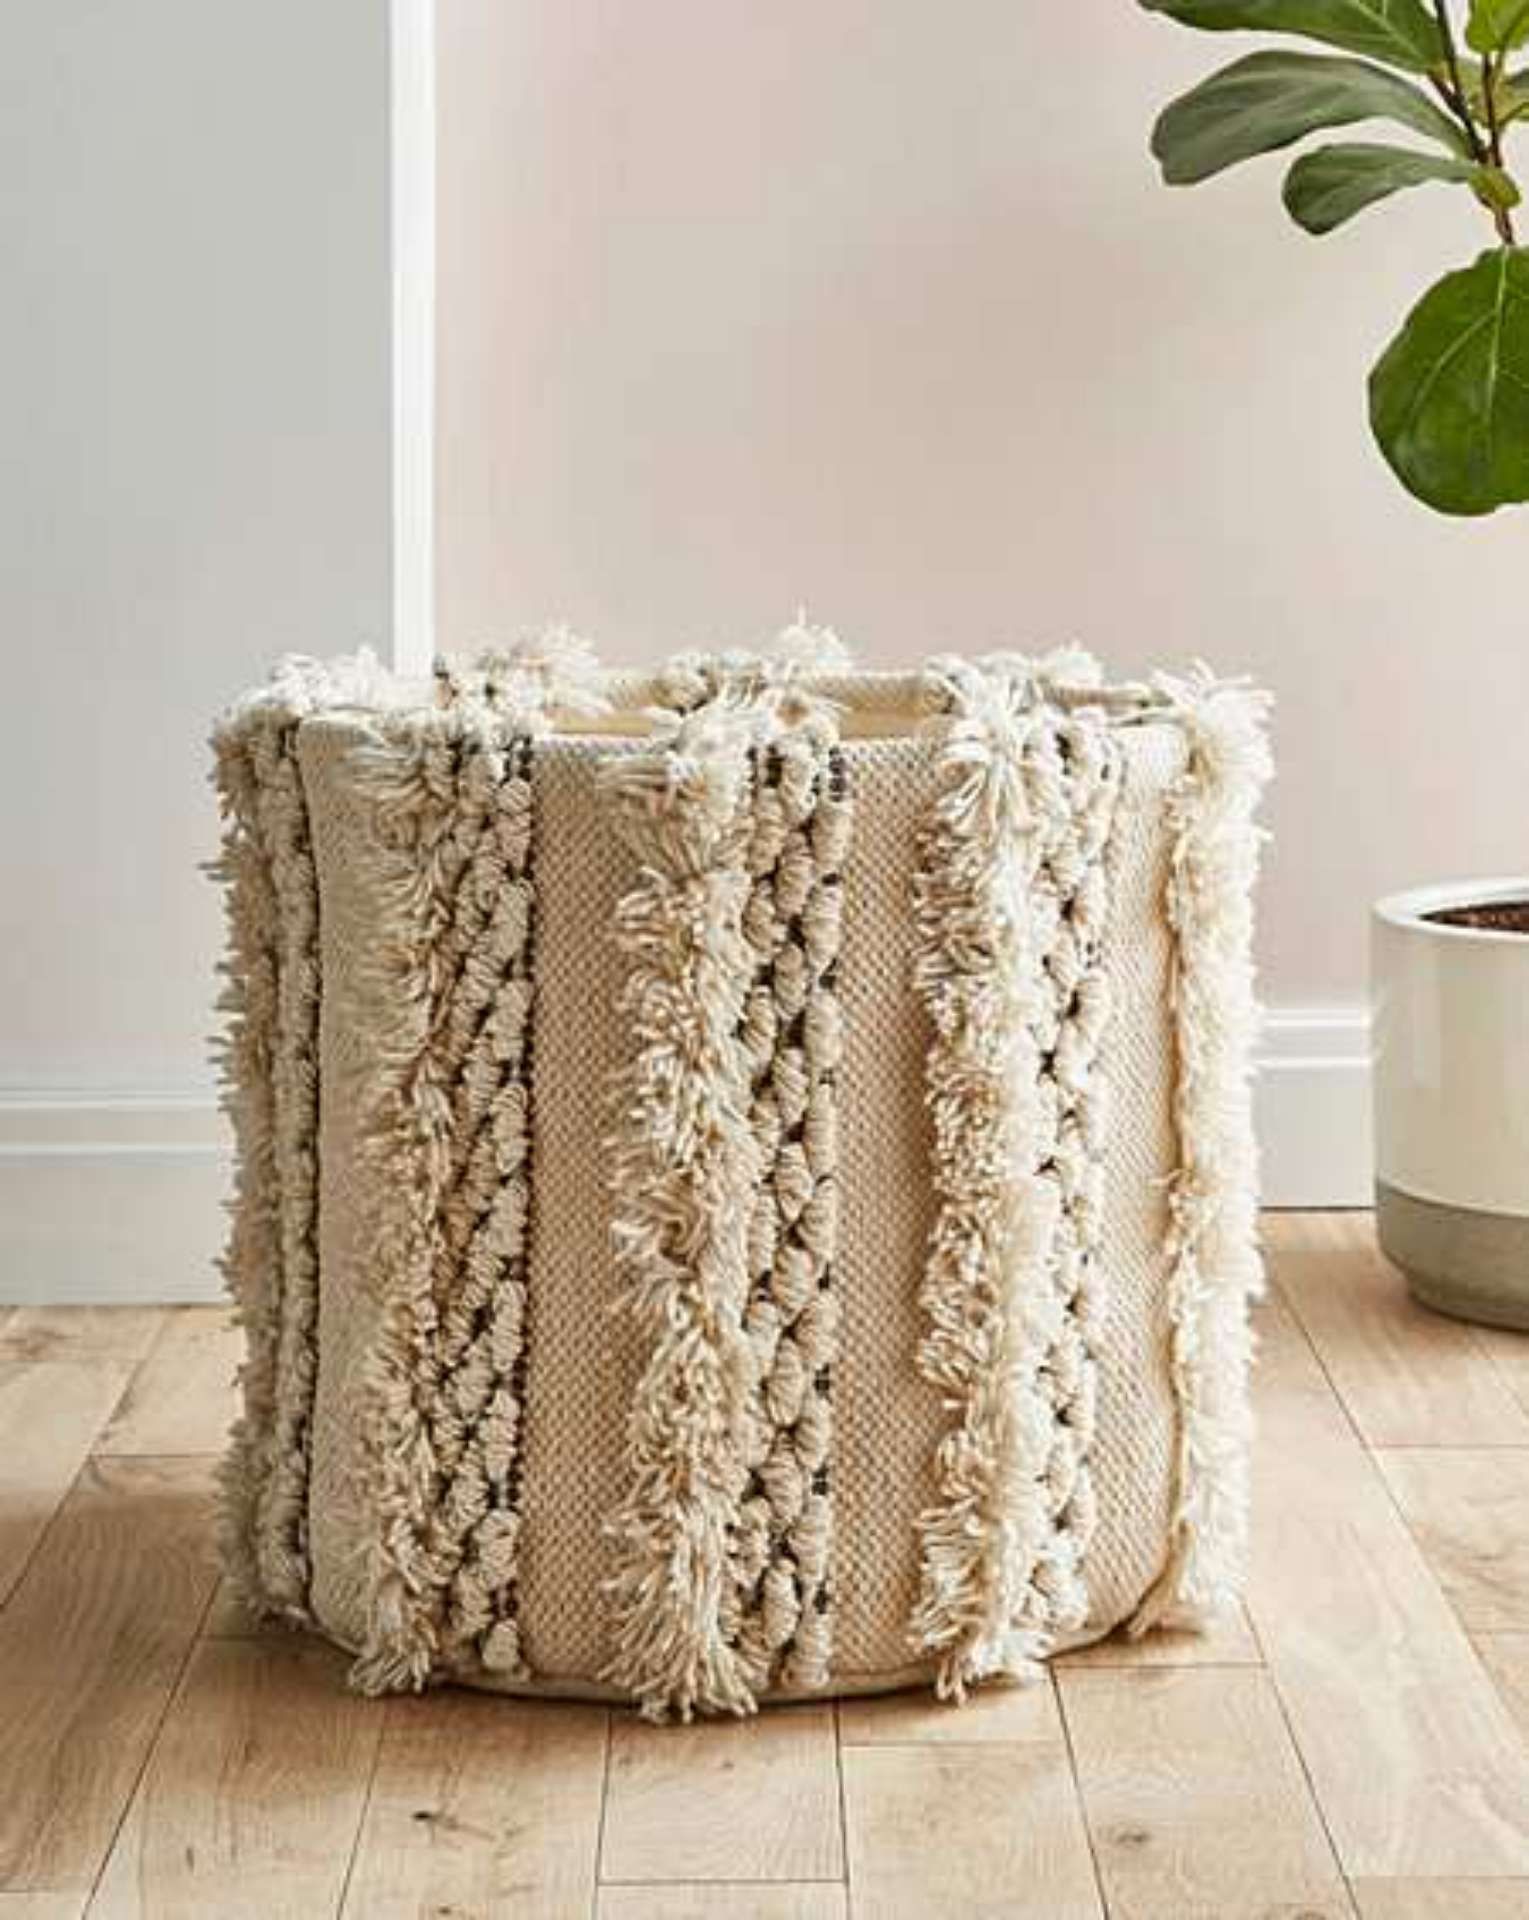 4x BRAND NEW LUXURY Embroidered Storage Basket. RRP £39 EACH. An attractive way to keep a space neat